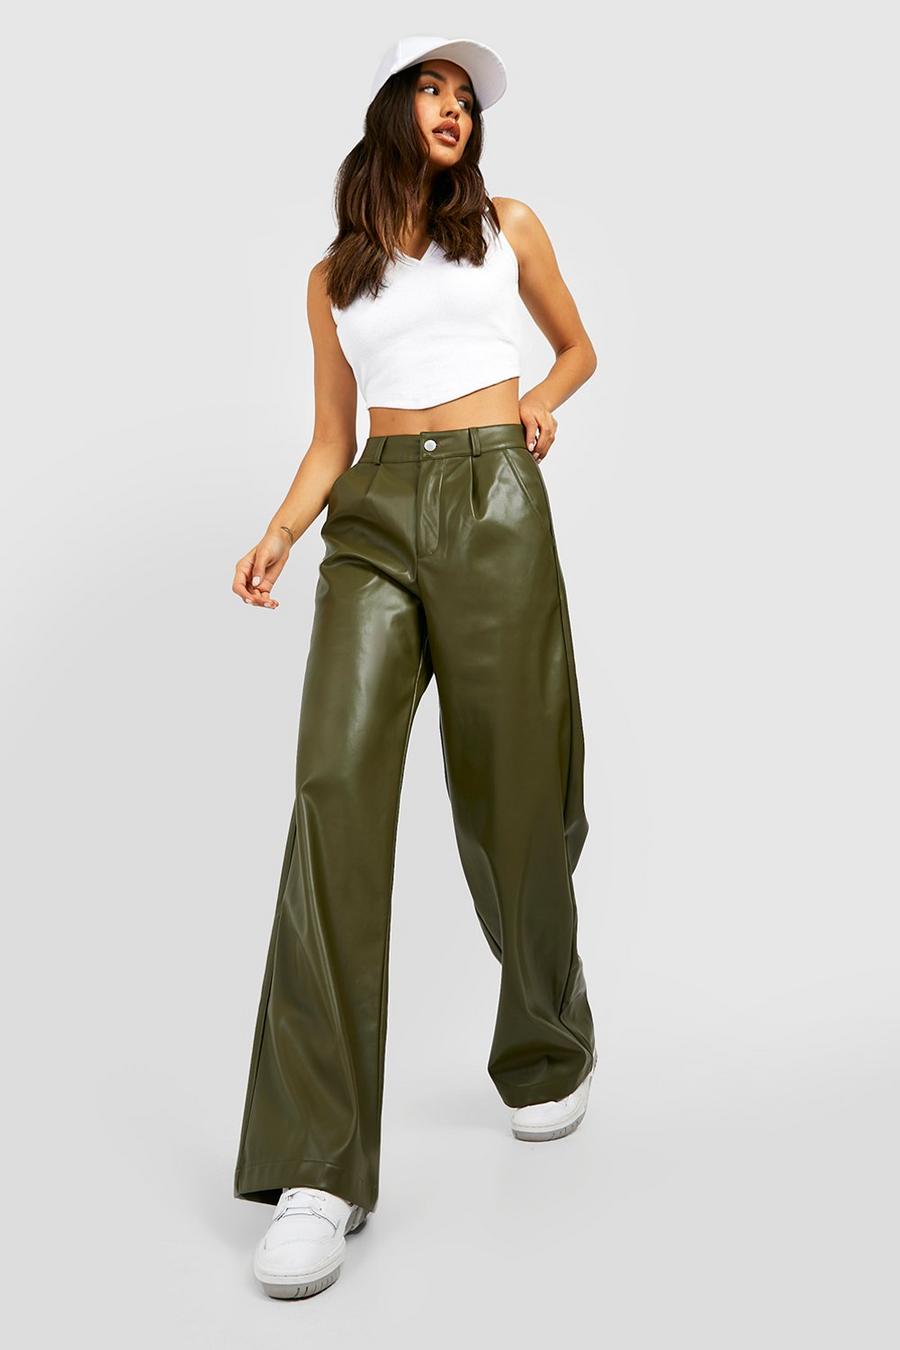 Khaki Faux Leather High Waisted Relax Fit Pants image number 1